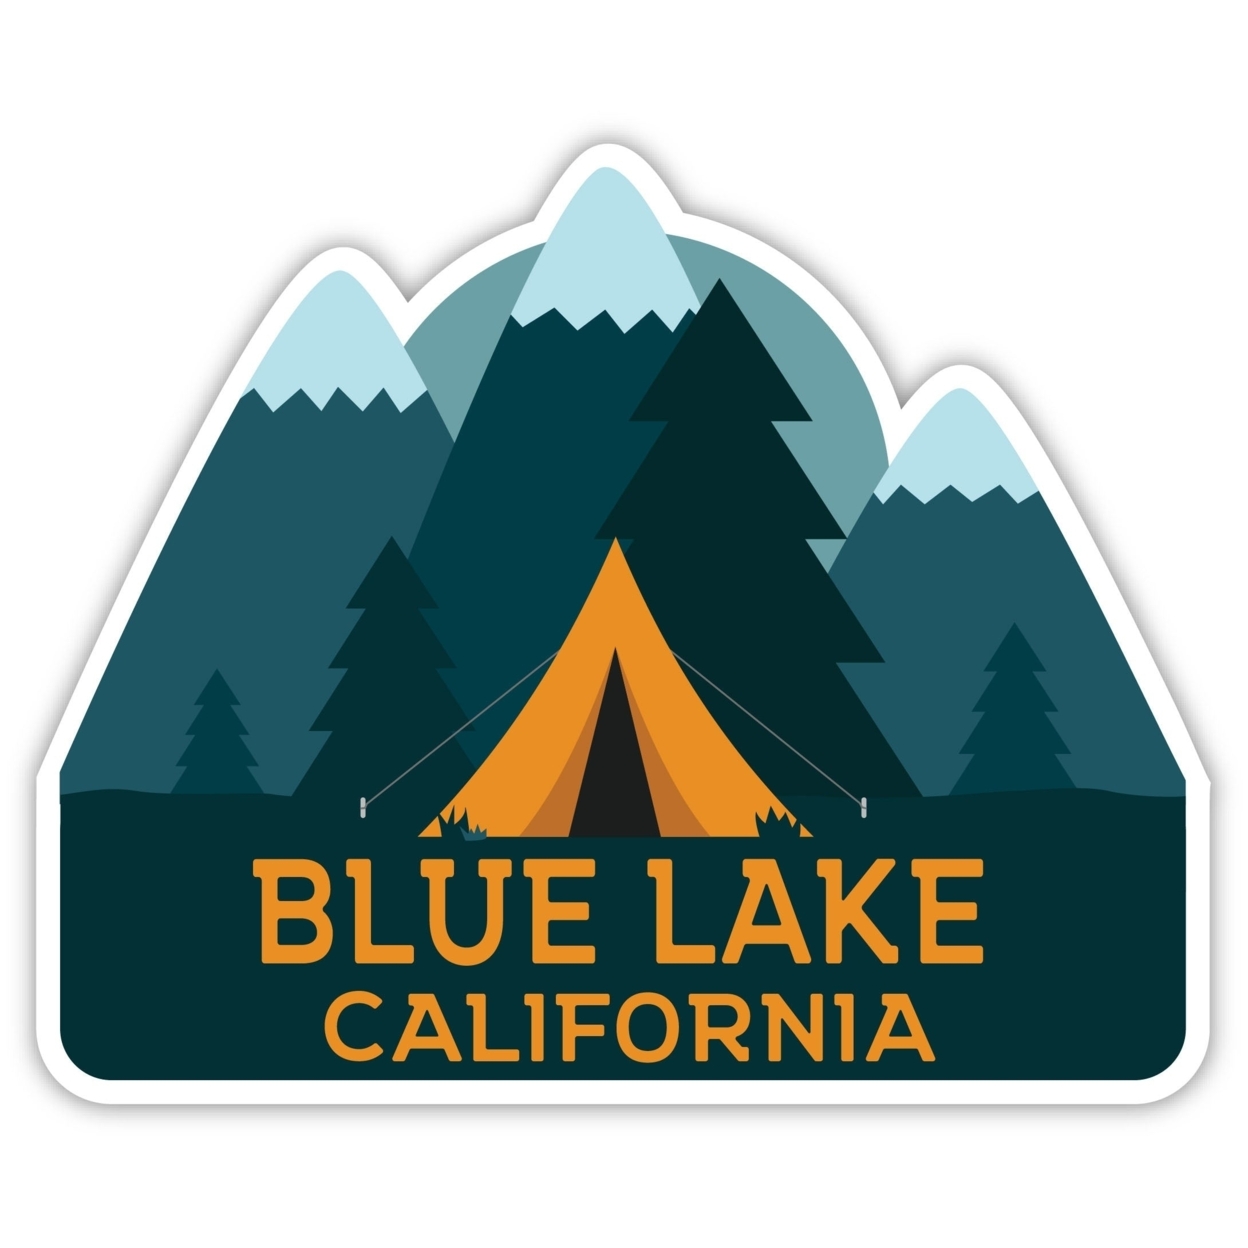 Blue Lake California Souvenir Decorative Stickers (Choose Theme And Size) - 4-Pack, 10-Inch, Tent